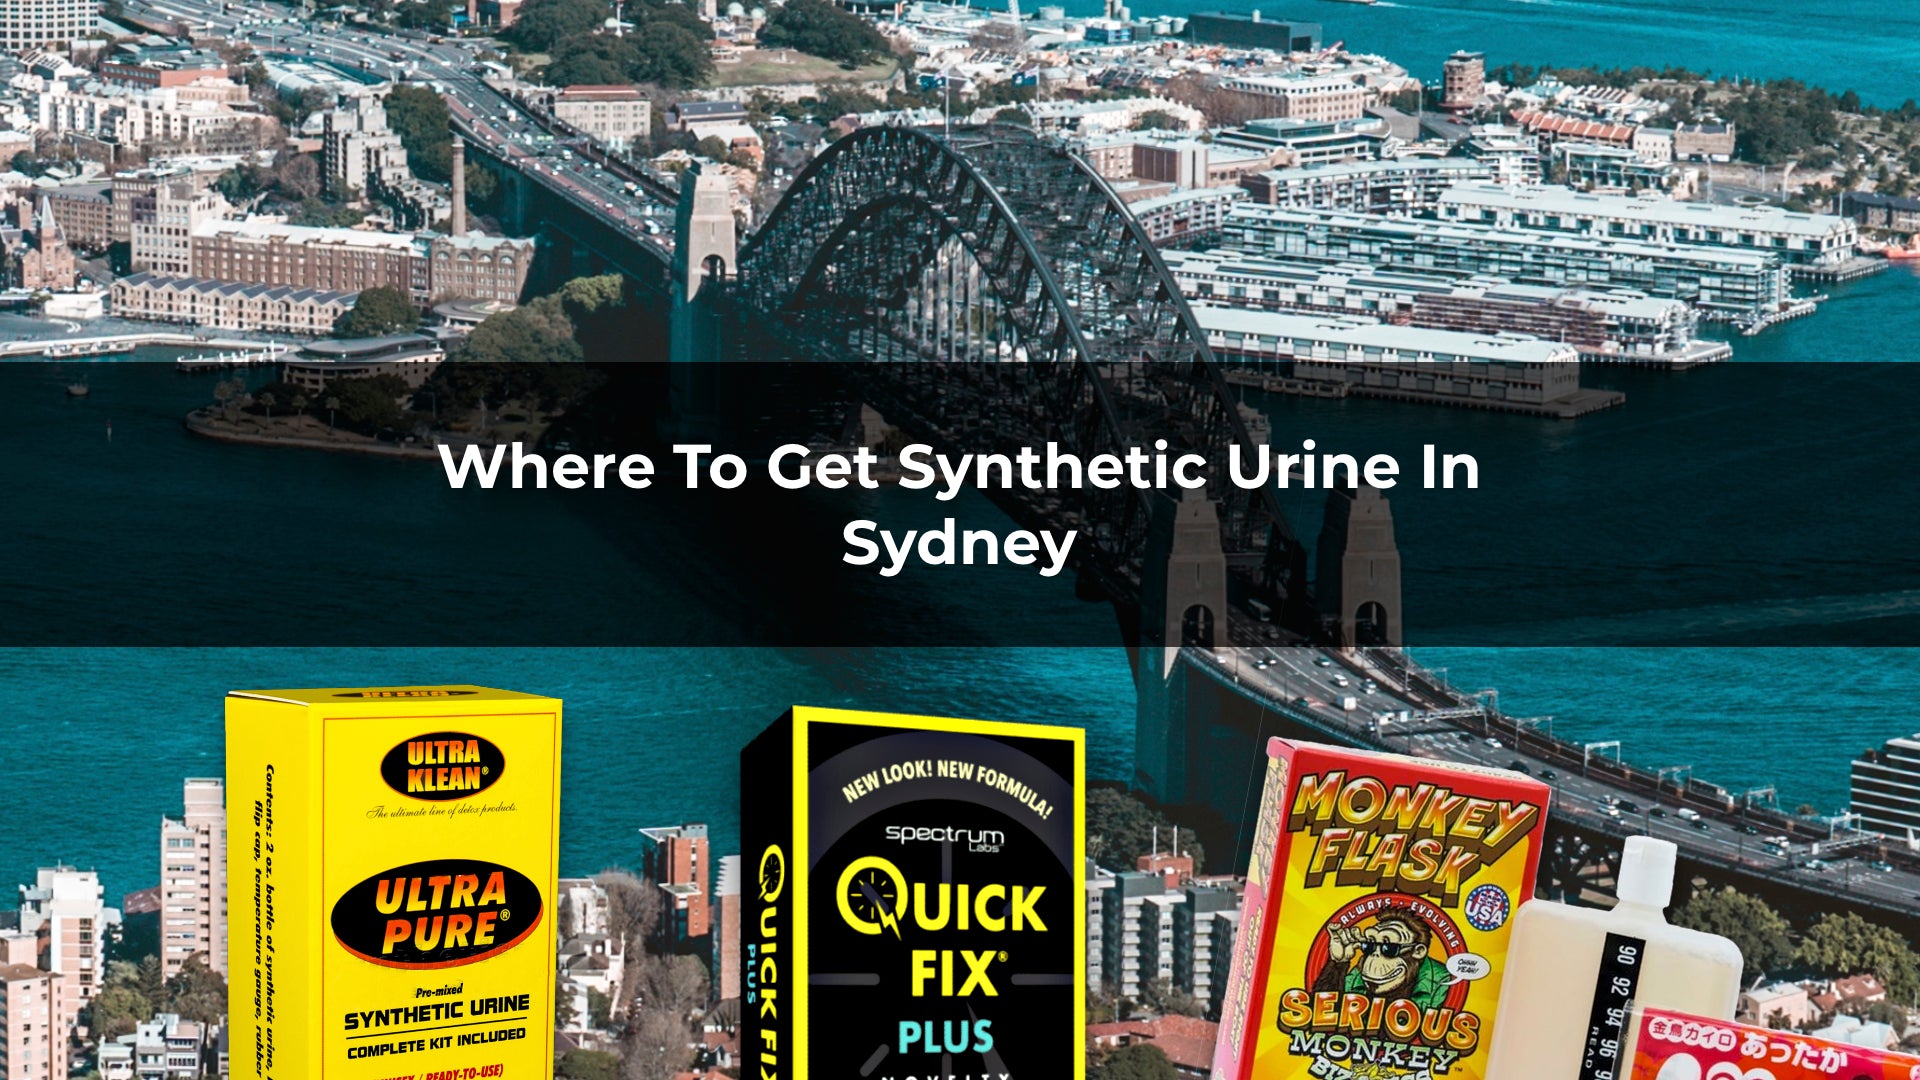 Where to Get Synthetic Urine in Sydney